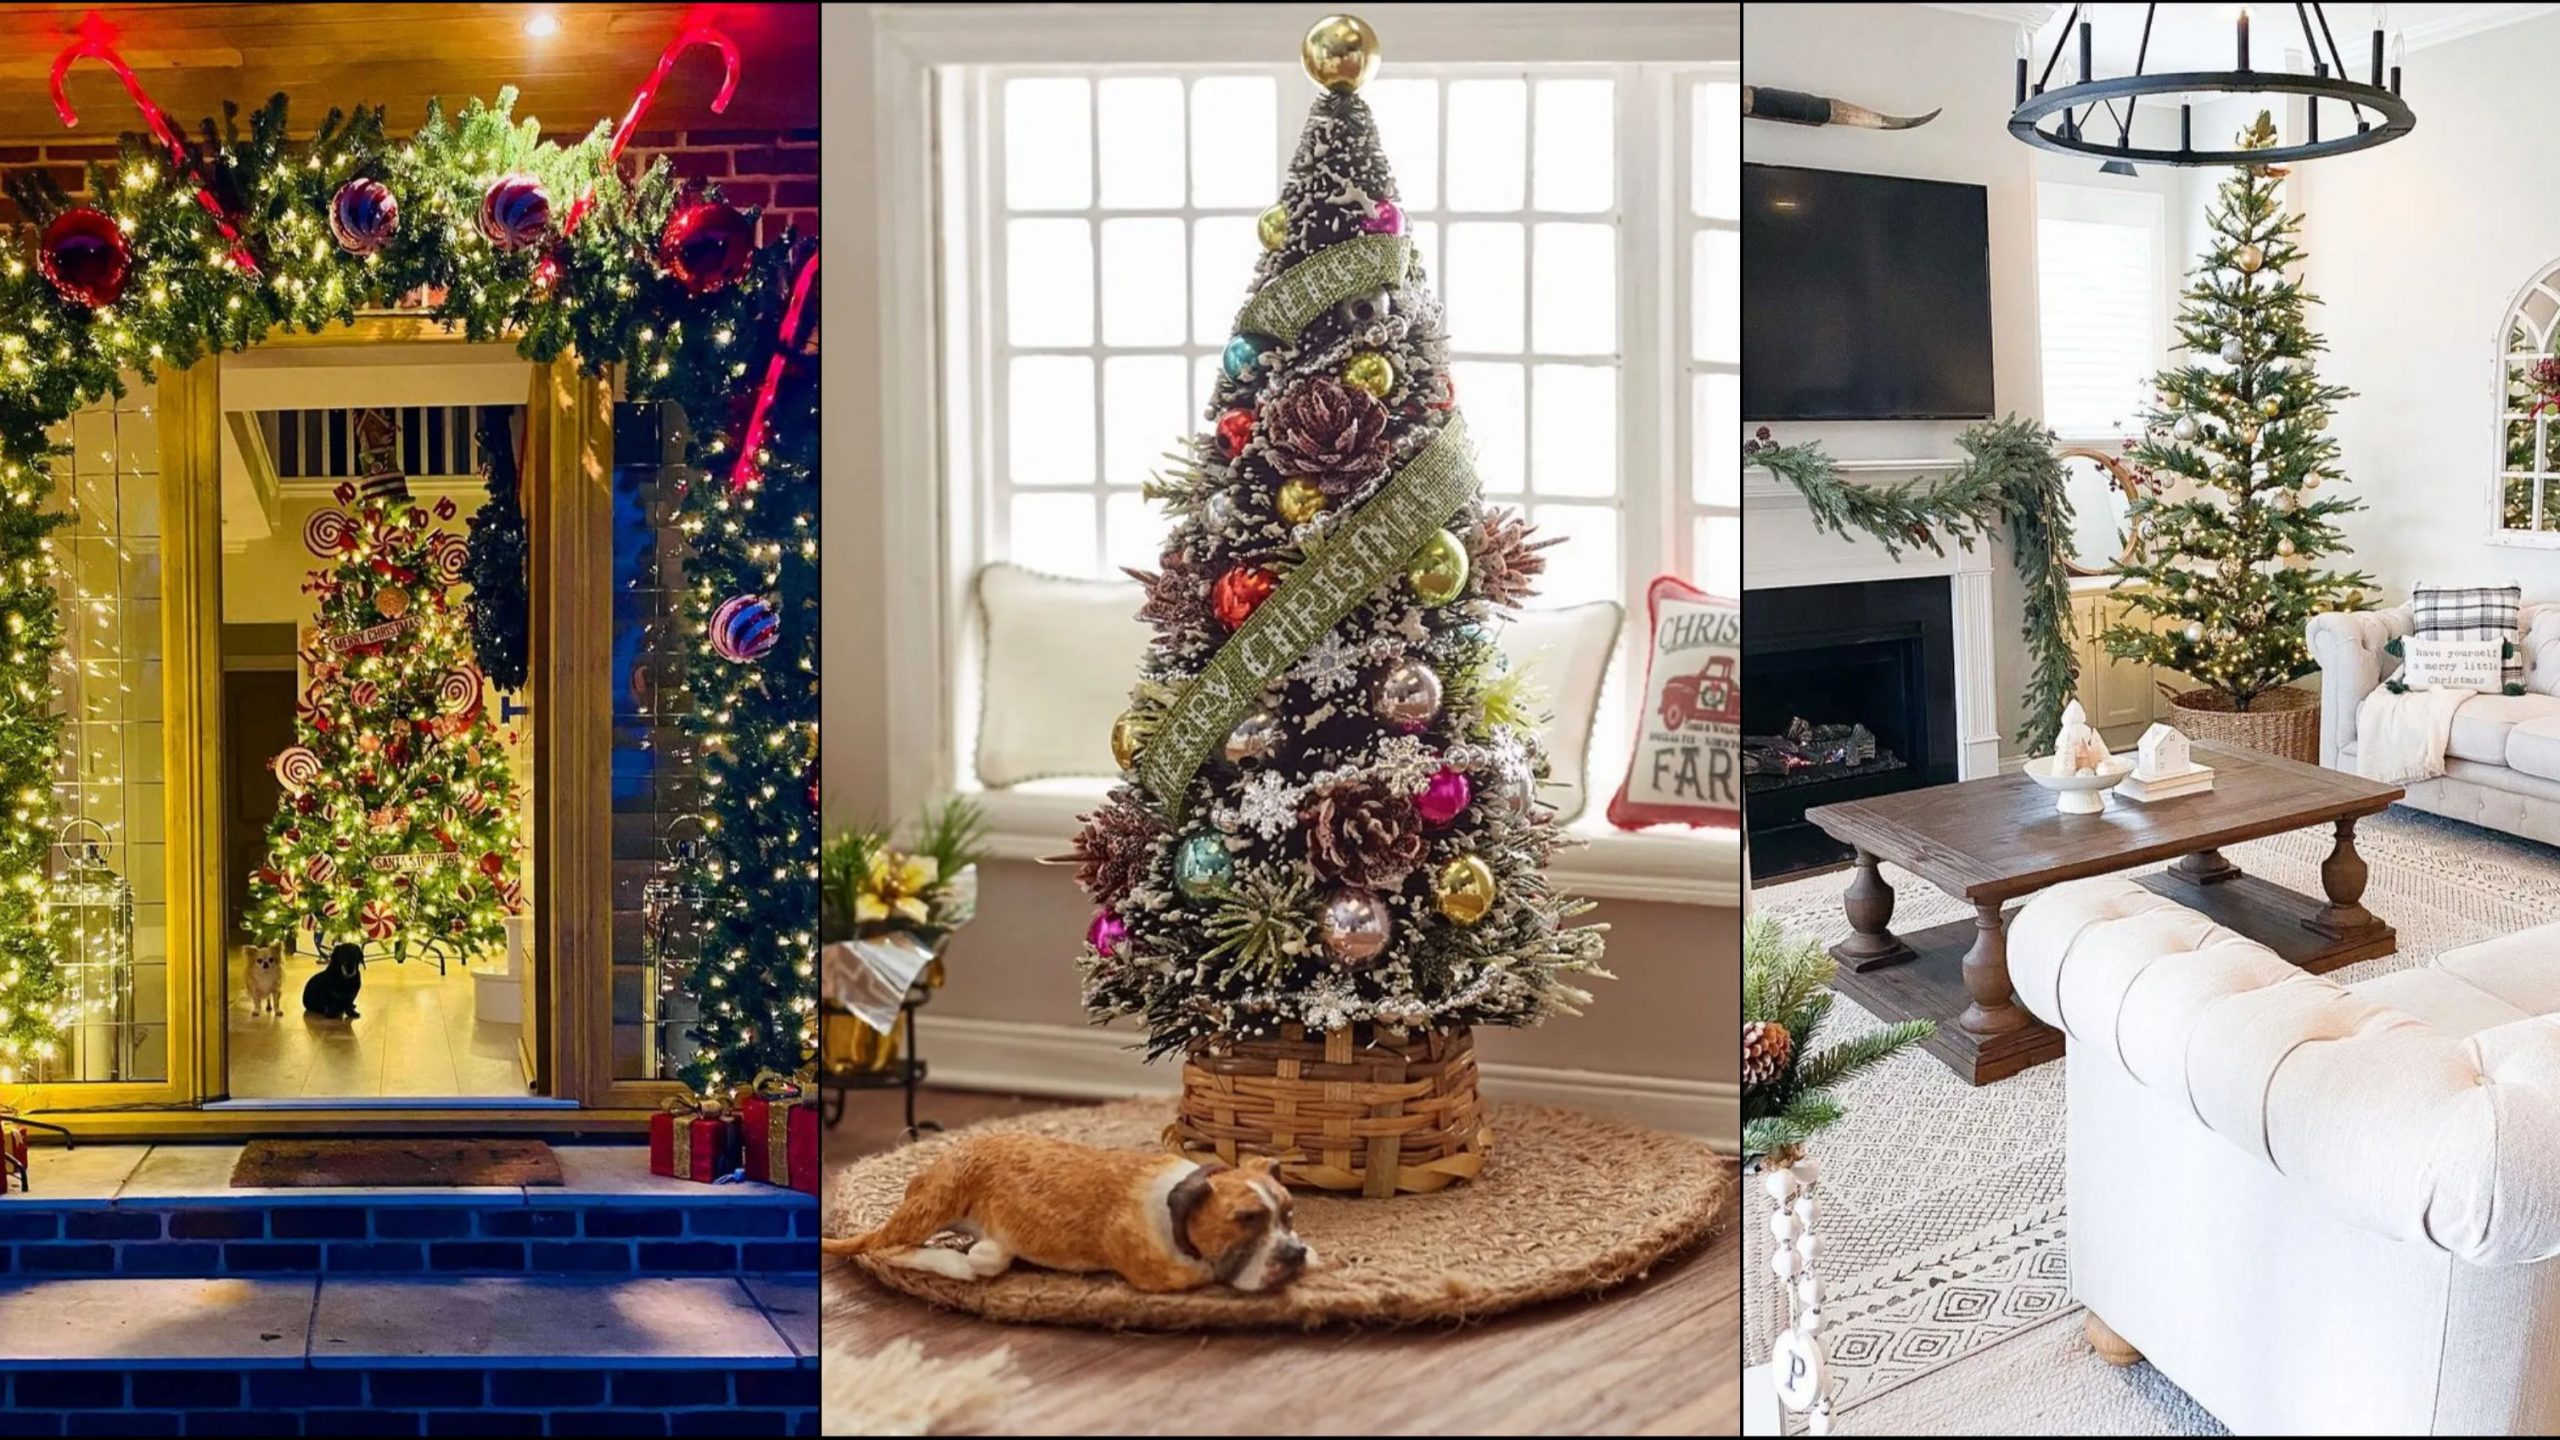 2020 Christmas trends to follow while ornamenting your home